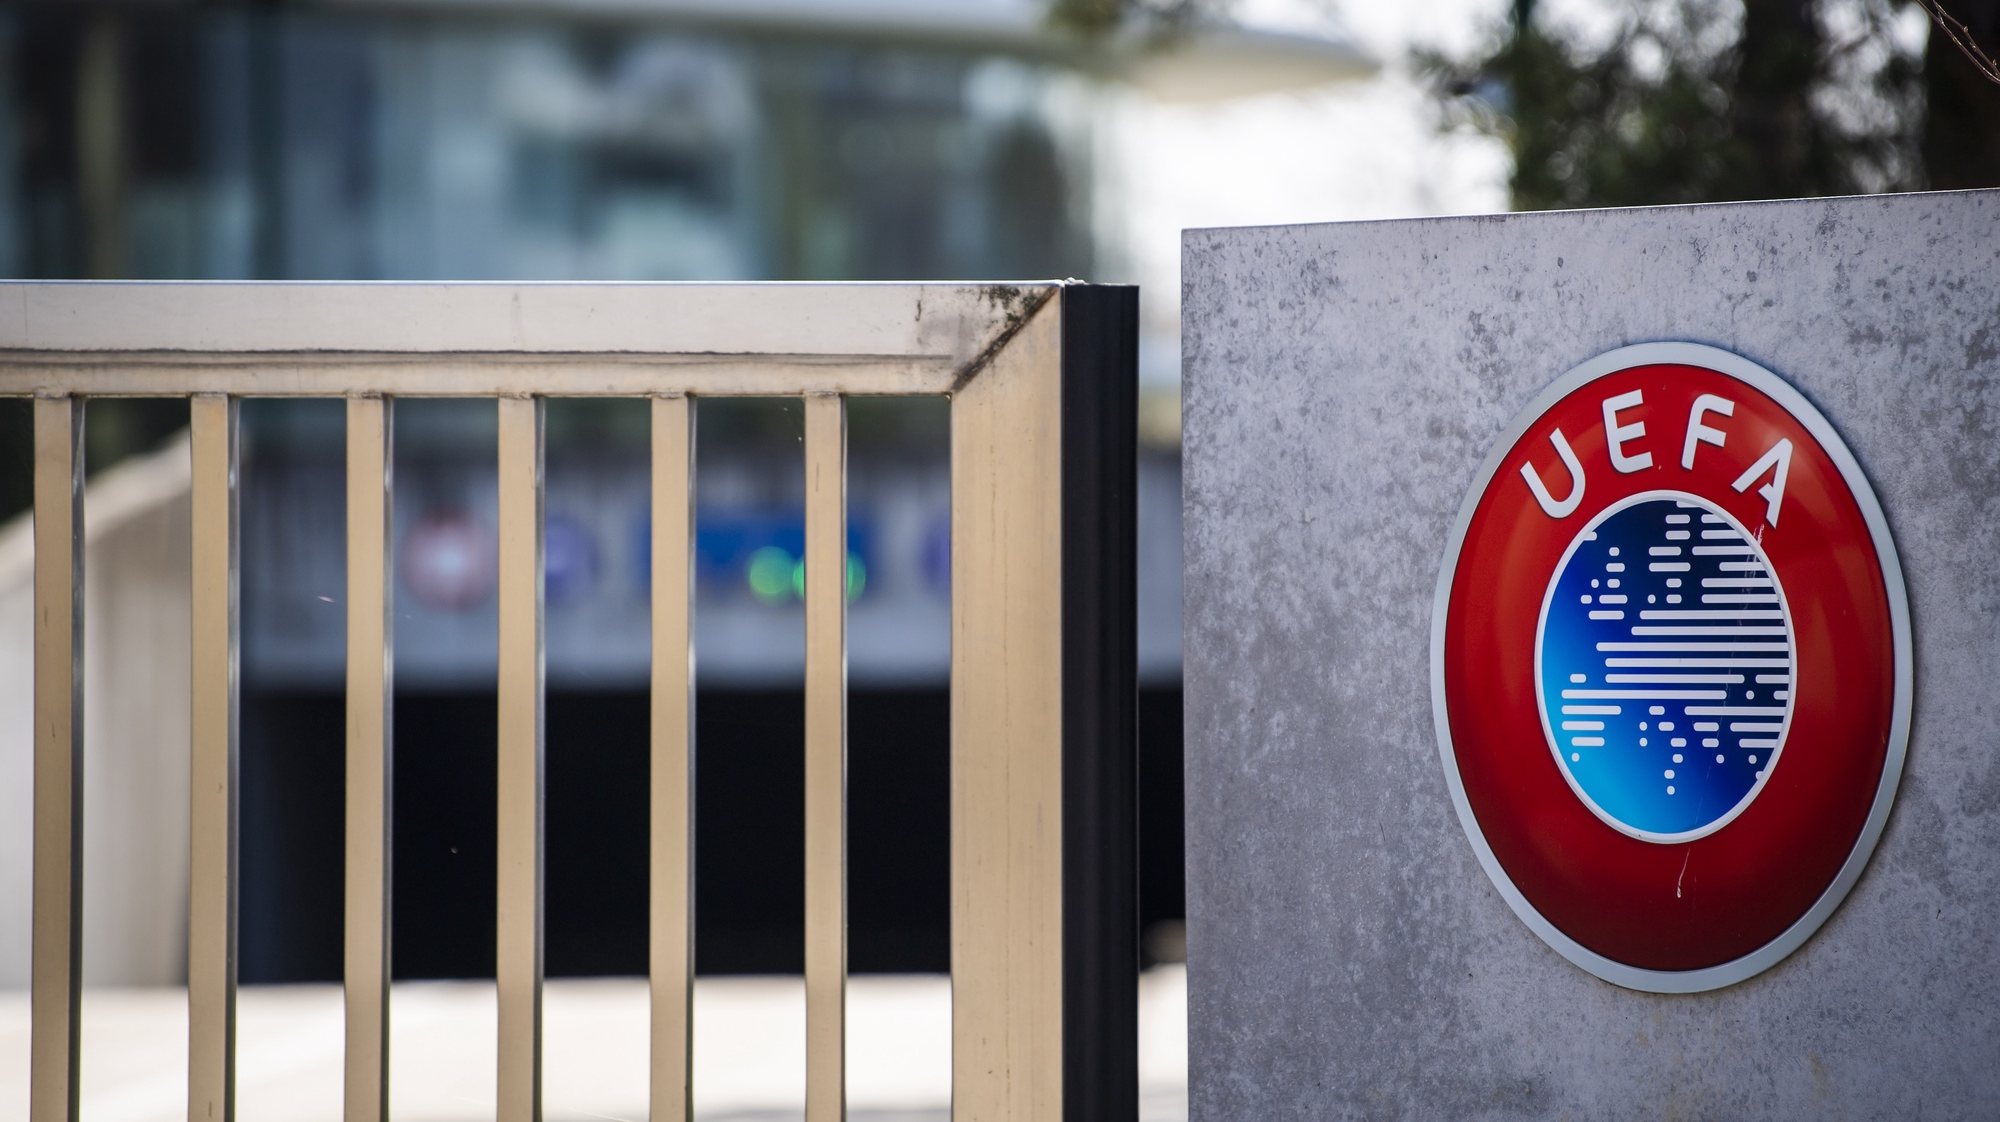 epa09792280 (FILE) - The UEFA logo is pictured at the entrance of the UEFA Headquarters, in Nyon, Switzerland, 17 March 2020 (re-issued on 28 February 2022). The European football governing body UEFA announced on 28 February 2022 to have ended its partnership with Gazprom across all competitions. &#039;The decision -announced UEFA- is effective immediately and covers all existing agreements including the UEFA Champions League, UEFA national team competitions and UEFA EURO 2024&#039;.  EPA/JEAN-CHRISTOPHE BOTT *** Local Caption *** 55959937